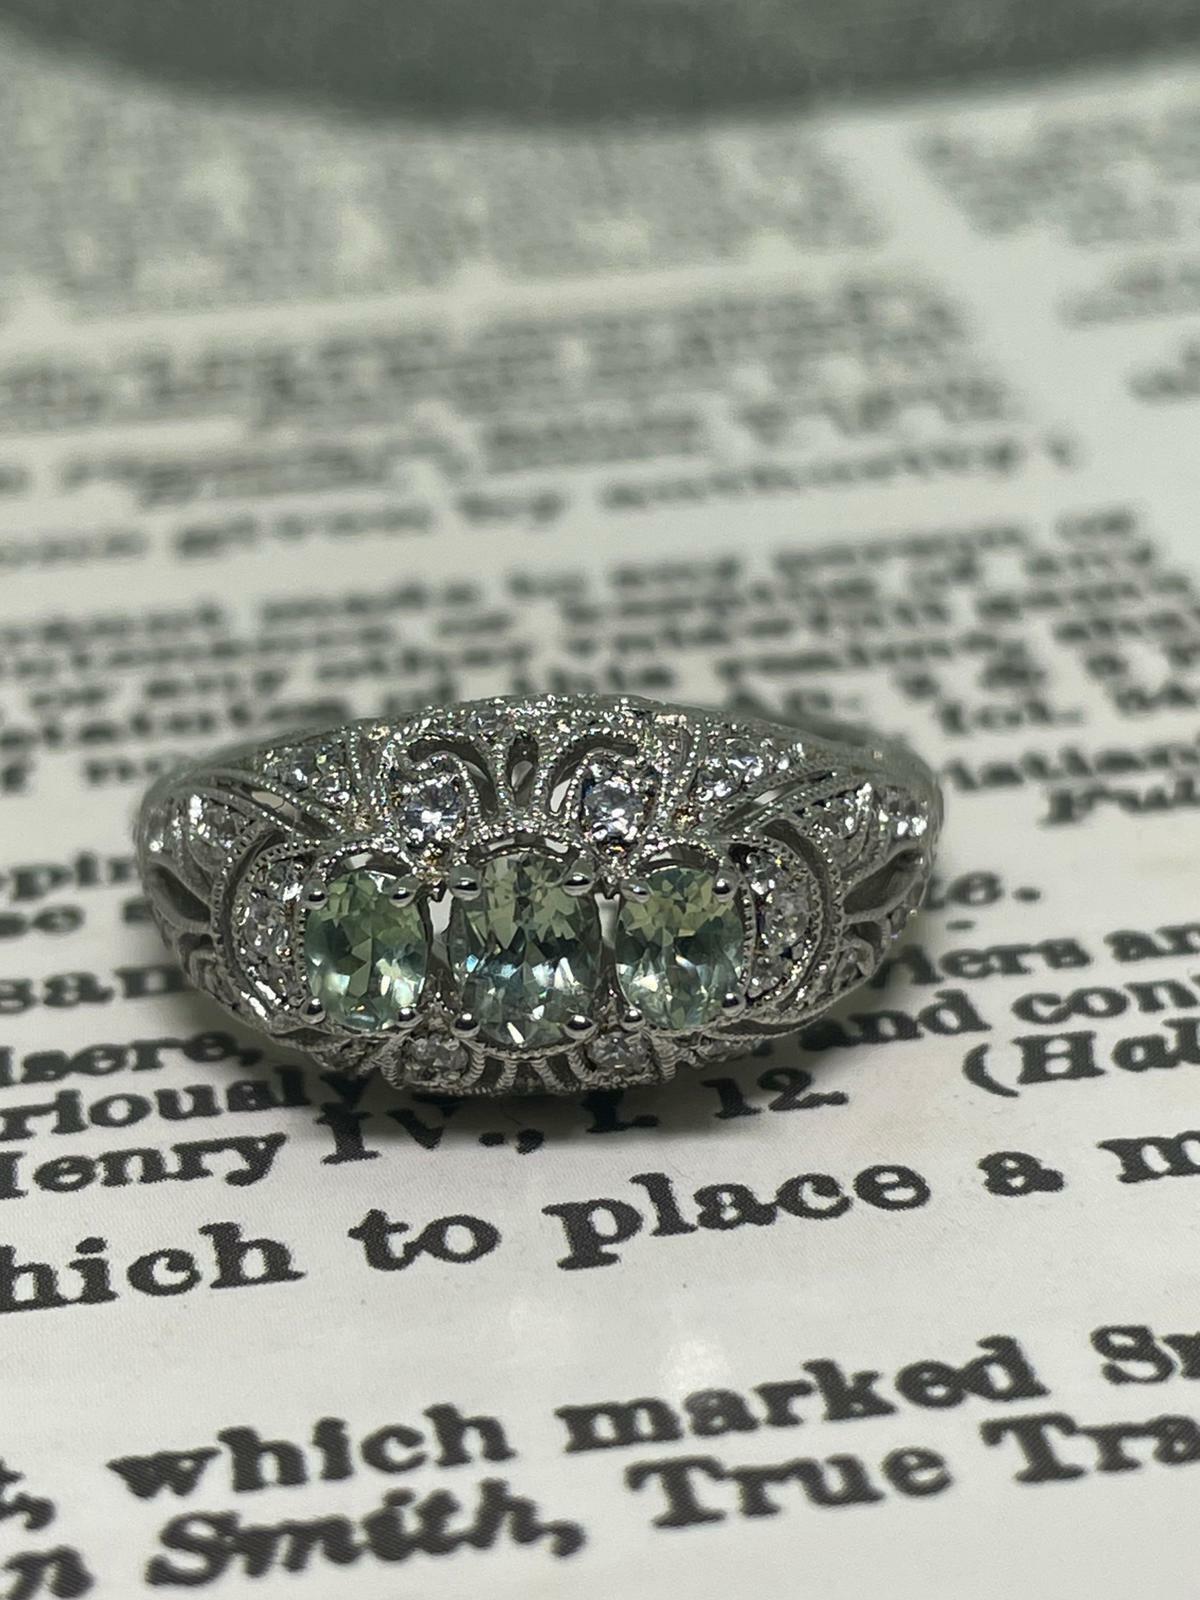 Of Art-Deco style,
this impressive vintage ring is meticulously crafted in 925 Sterling Silver, 
embellished with fine Swiss Cubic Zirconias (CZ's) 
within gorgeous pierced gallery setting, 
featuring openwork & floral motifs 

Centering 3 Natural